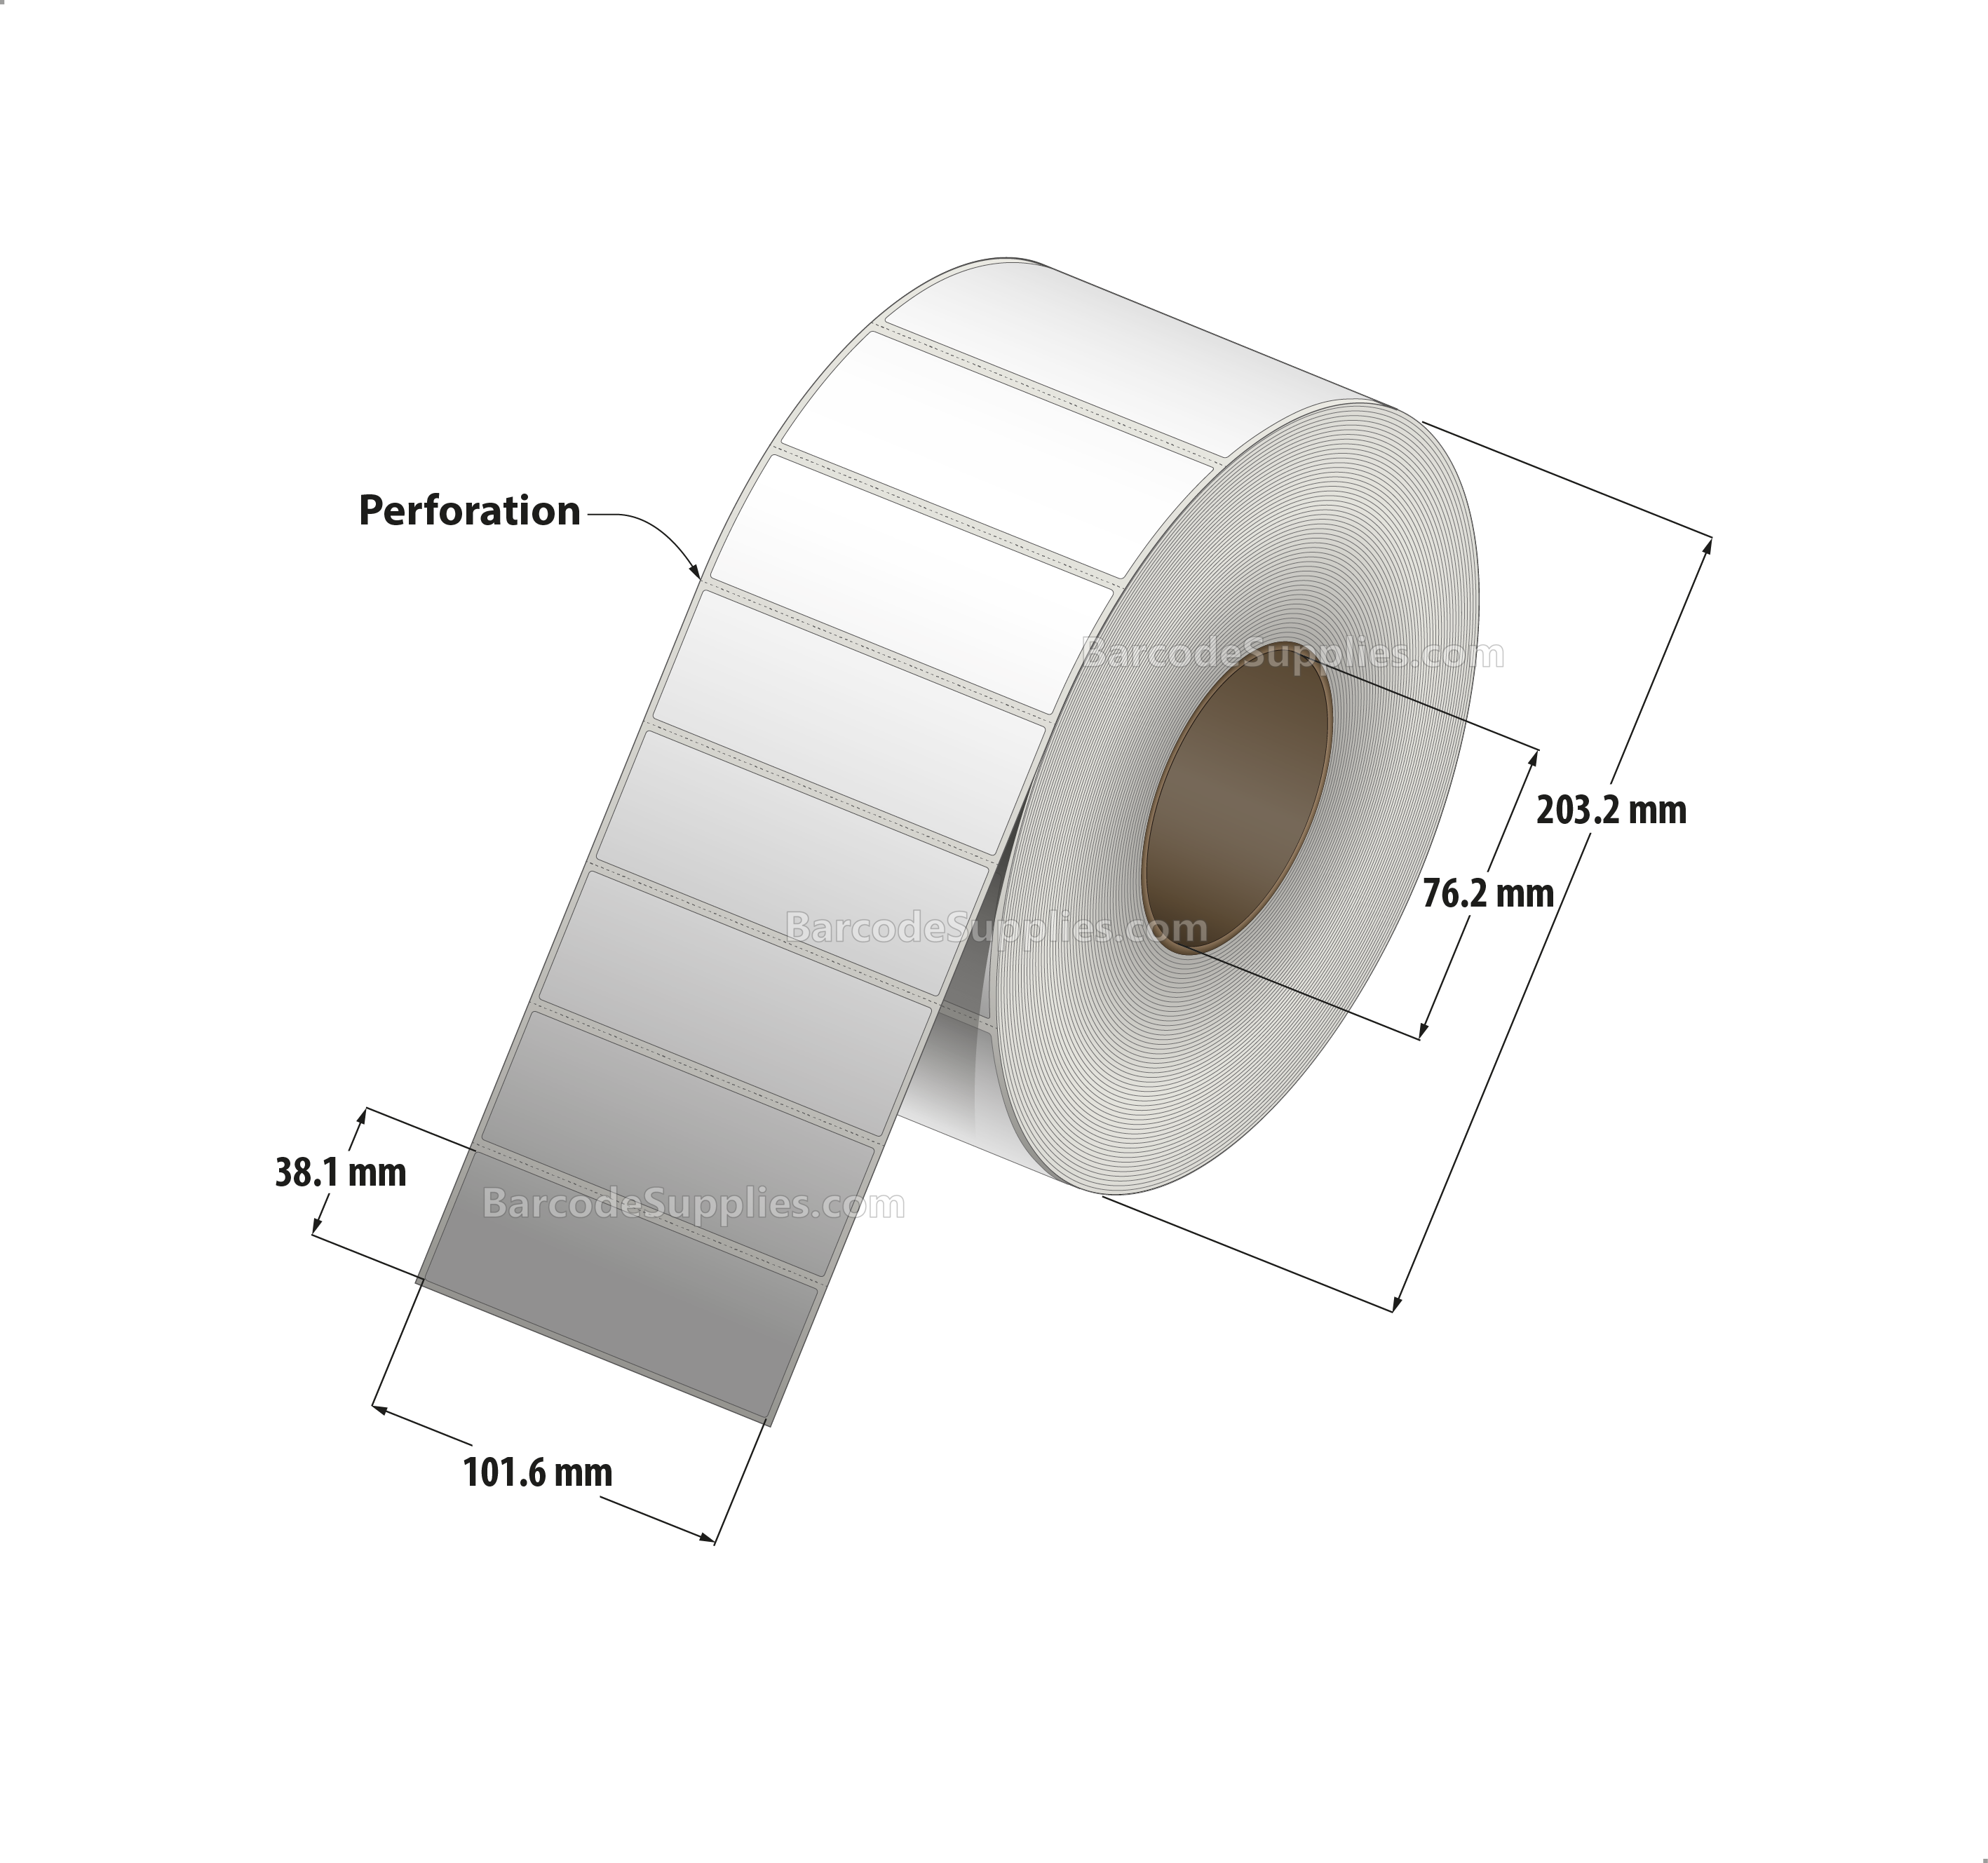 4 x 1.5 Thermal Transfer White Labels With Rubber Adhesive - Perforated - 3850 Labels Per Roll - Carton Of 4 Rolls - 15400 Labels Total - MPN: CTT400150-3P